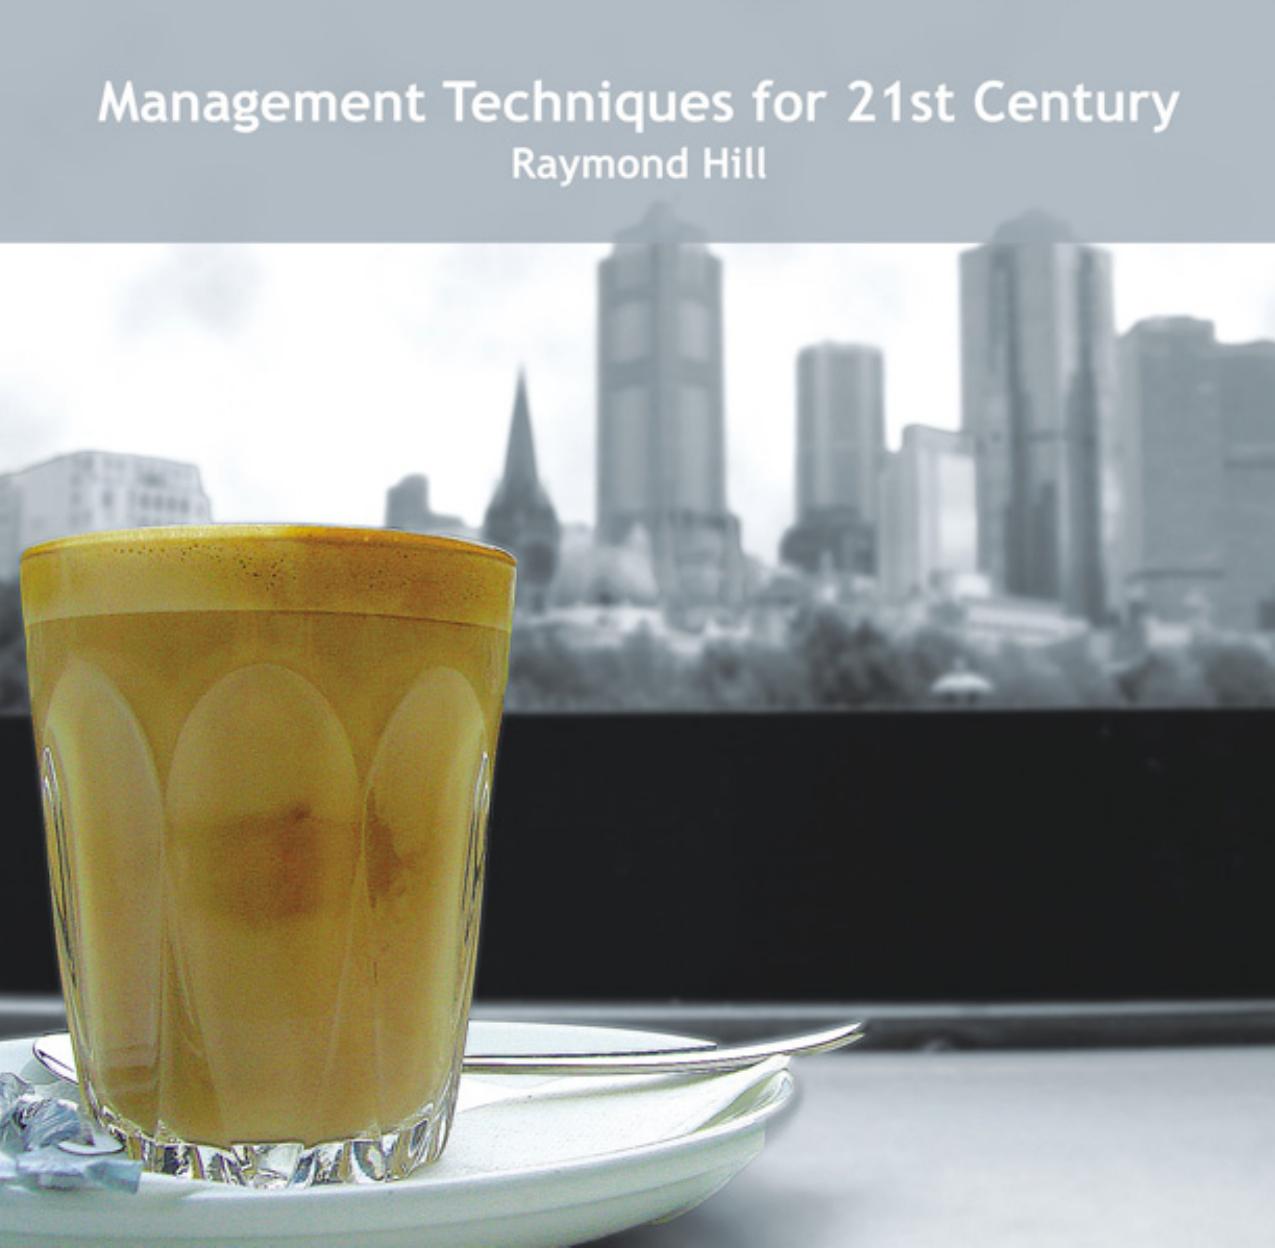 Management Techniques for 21st Century by Raymond Hill